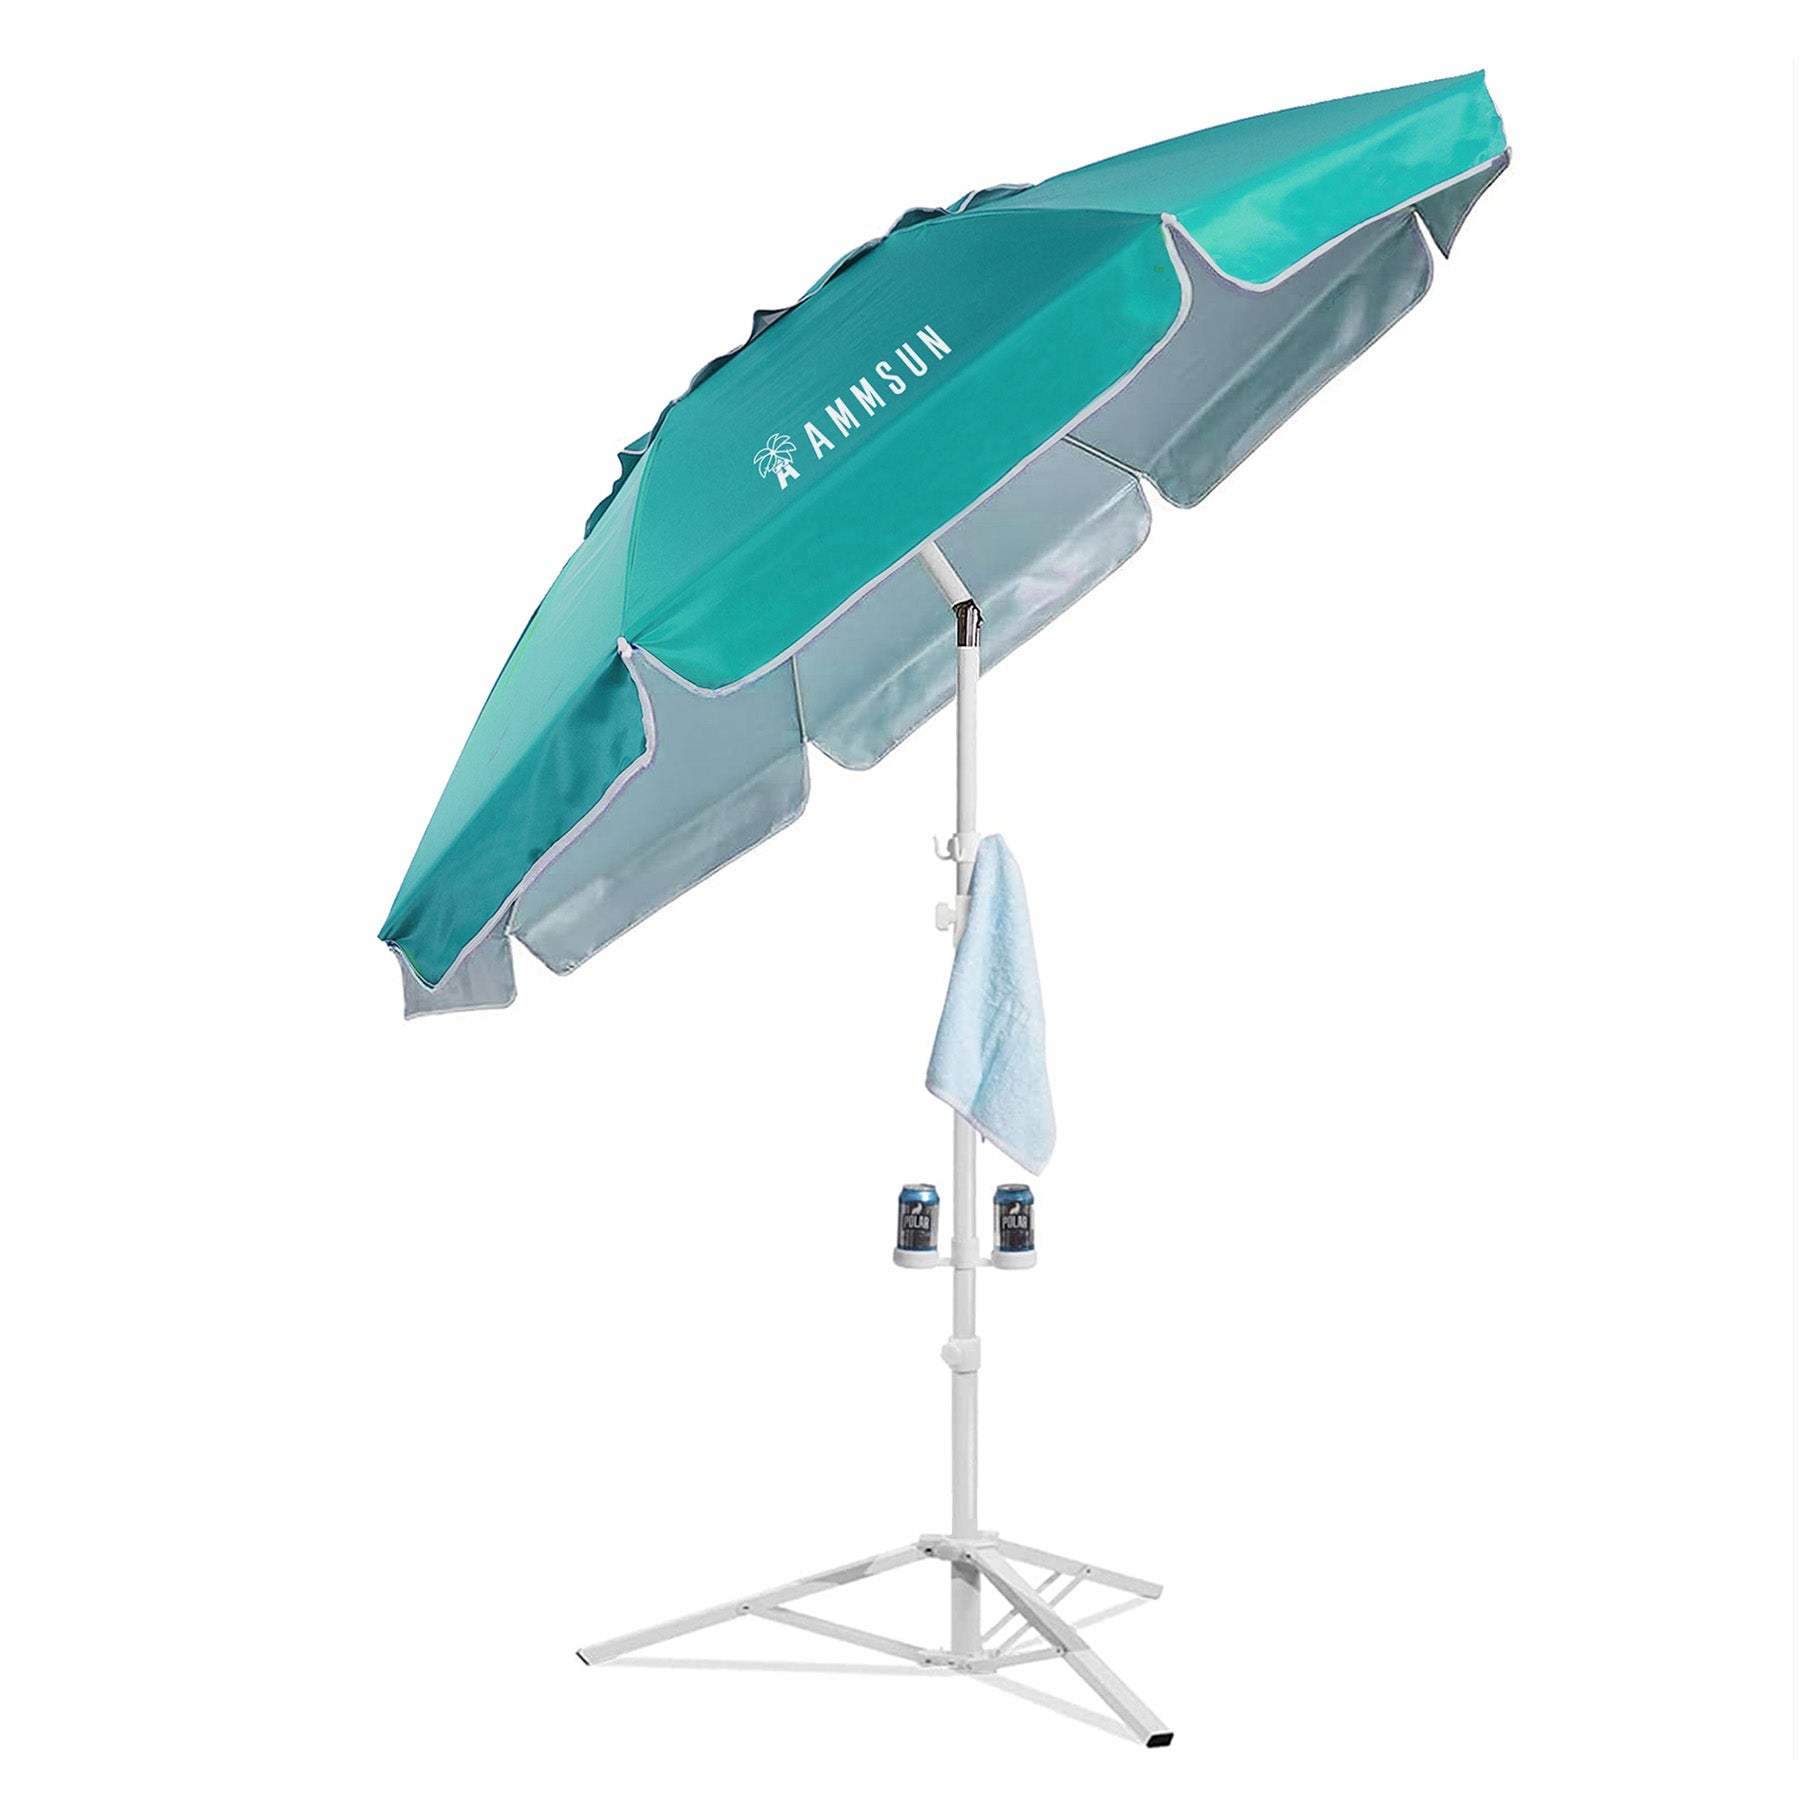 AMMSUN 6.5ft Lightweight Portable Sports Umbrella with Stand Turquoise